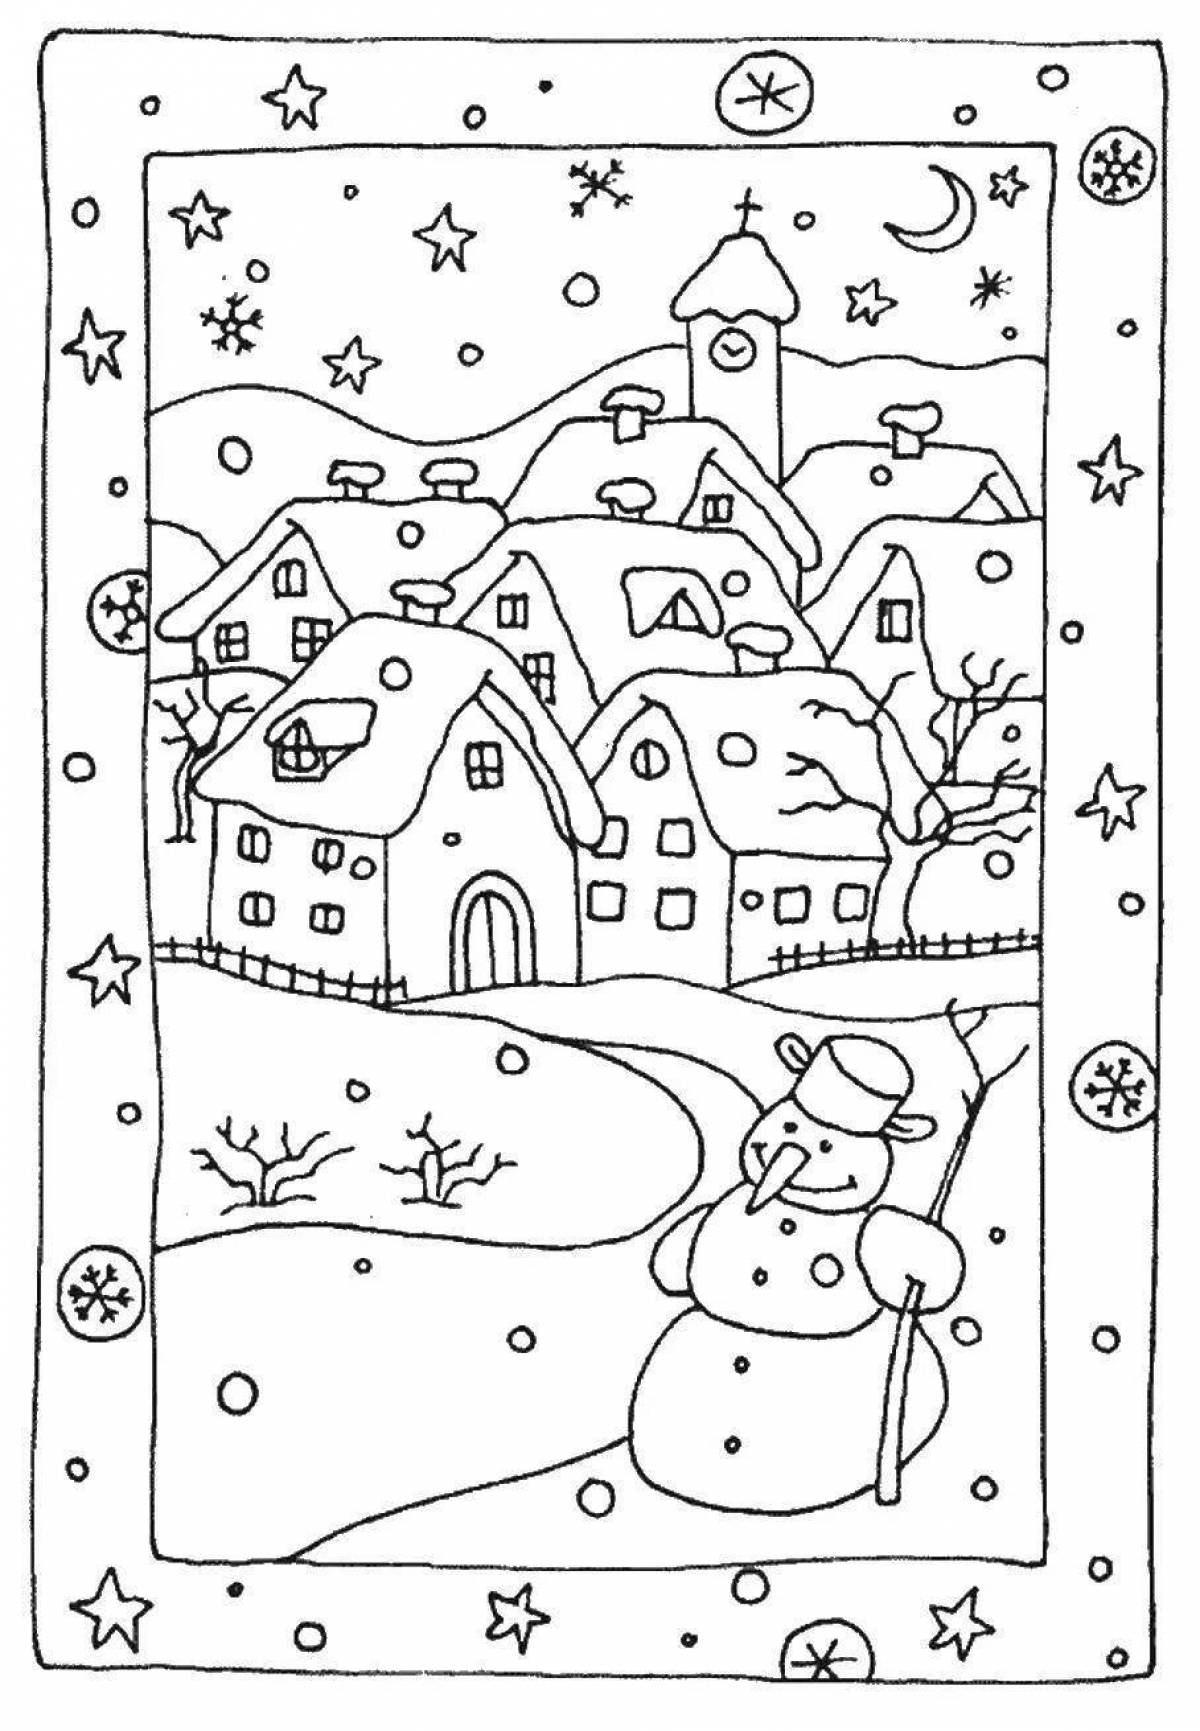 Fancy coloring by numbers winter for kids